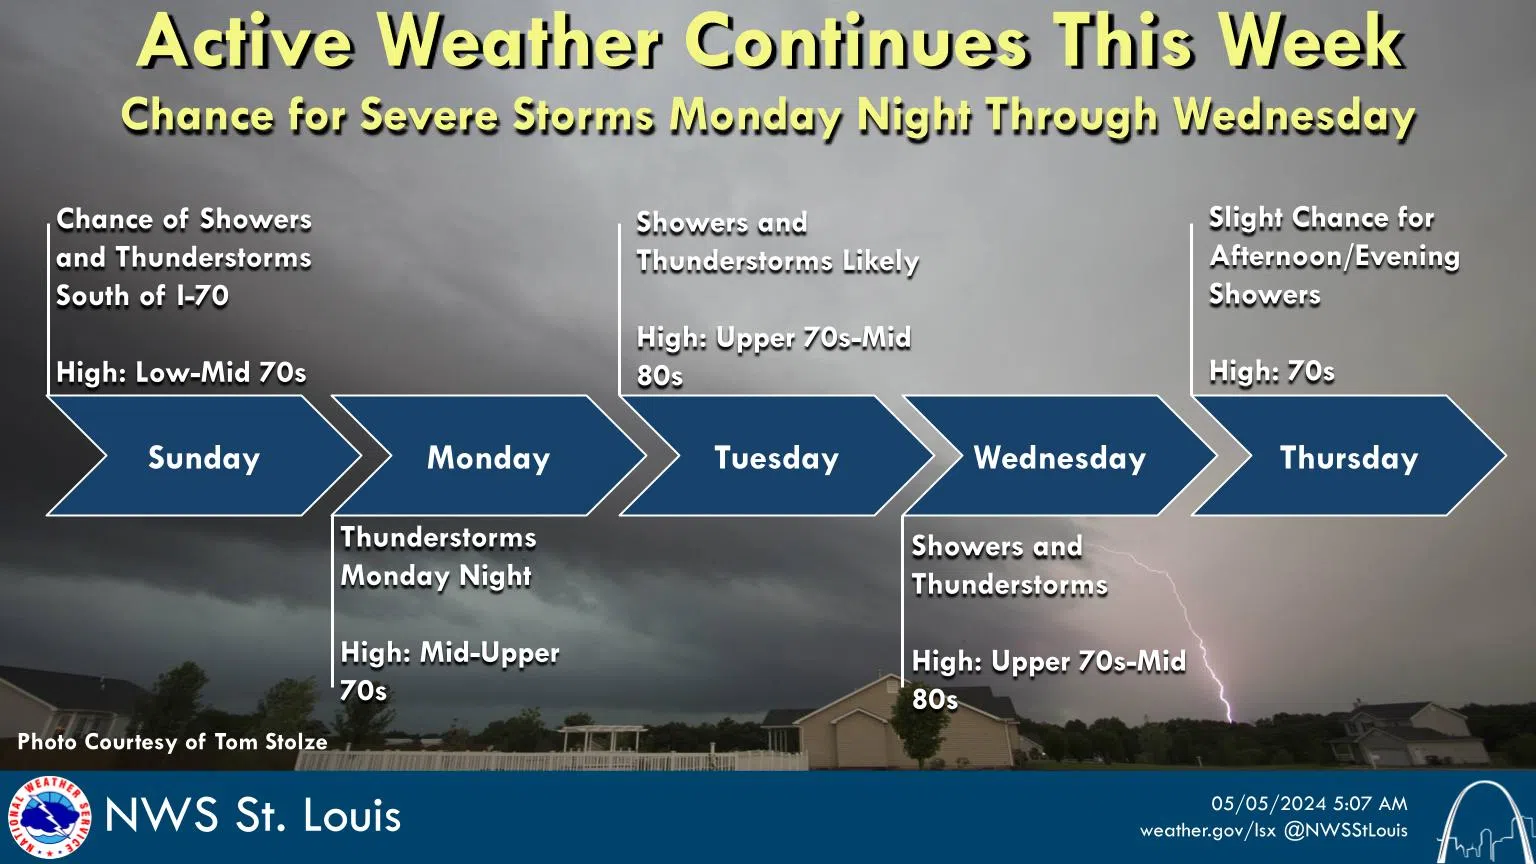 Partly Sunny & Mild today, Storms return on Monday with severe weather changes